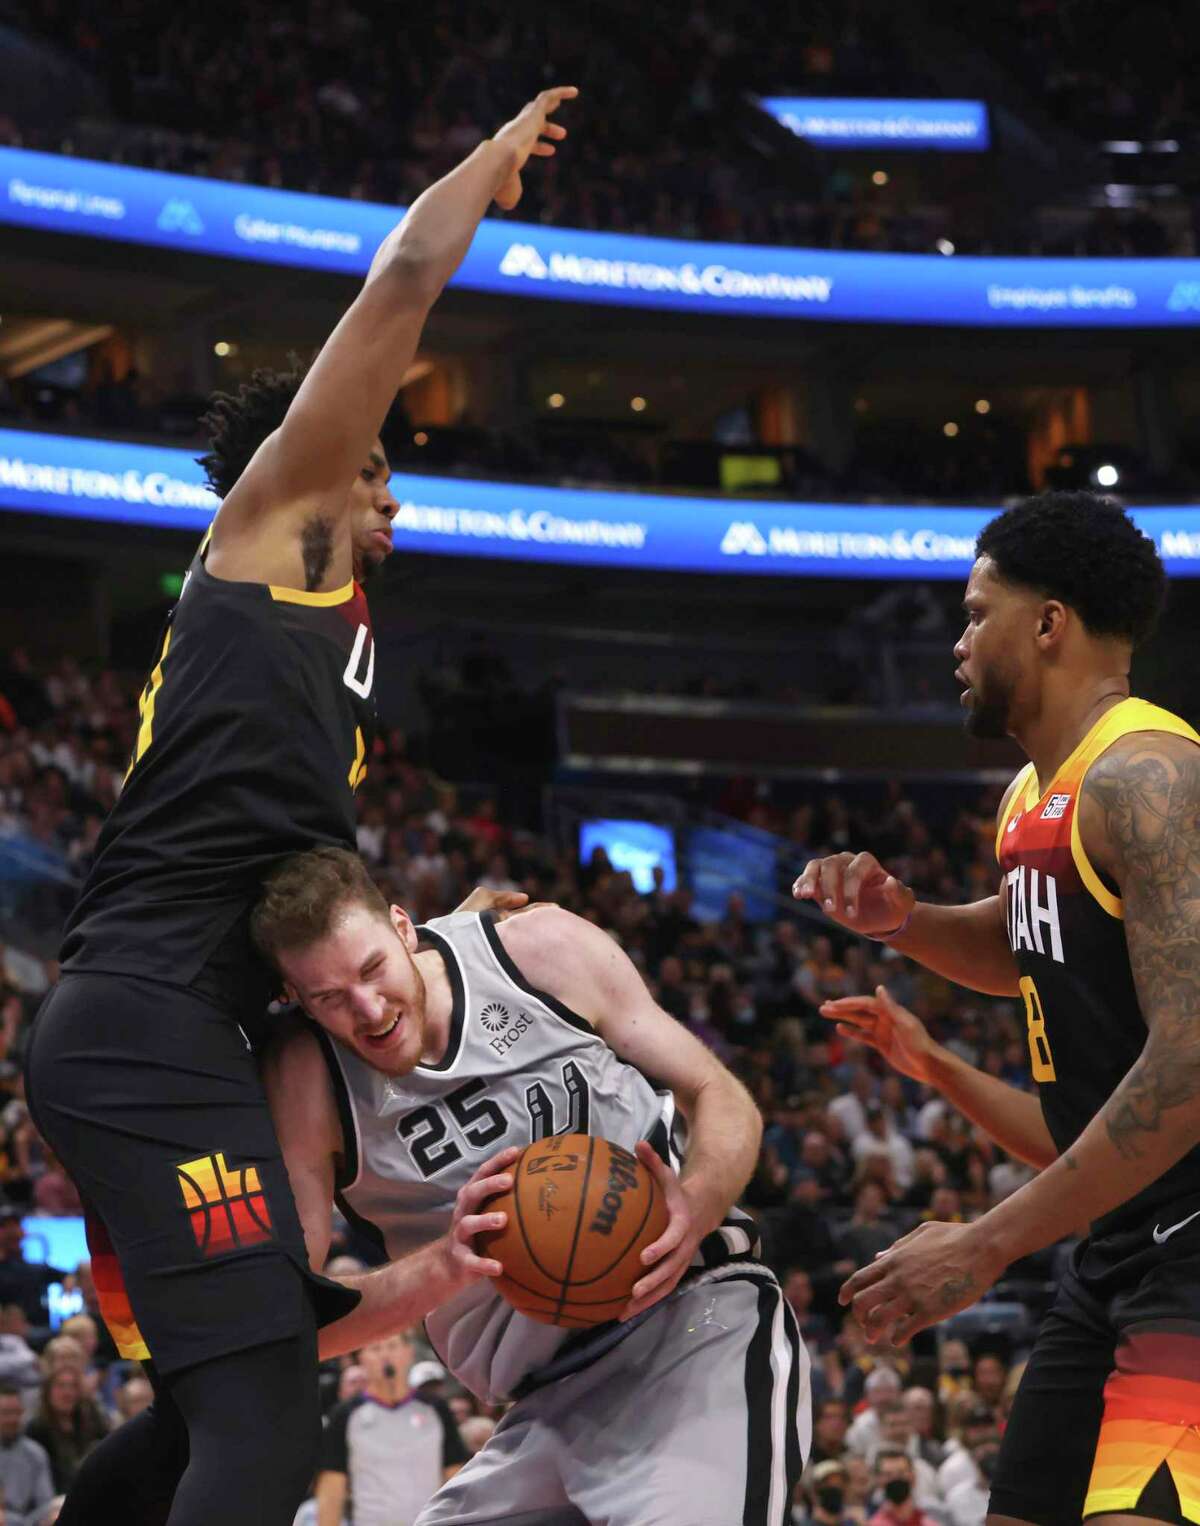 San Antonio Spurs center Jakob Poeltl (25) looks for an opening as Utah Jazz center Hassan Whiteside, left, and Rudy Gay (8) defend during the first half of an NBA basketball game on Friday, Dec. 17 2021, in Salt Lake City. (AP Photo/Kim Raff)